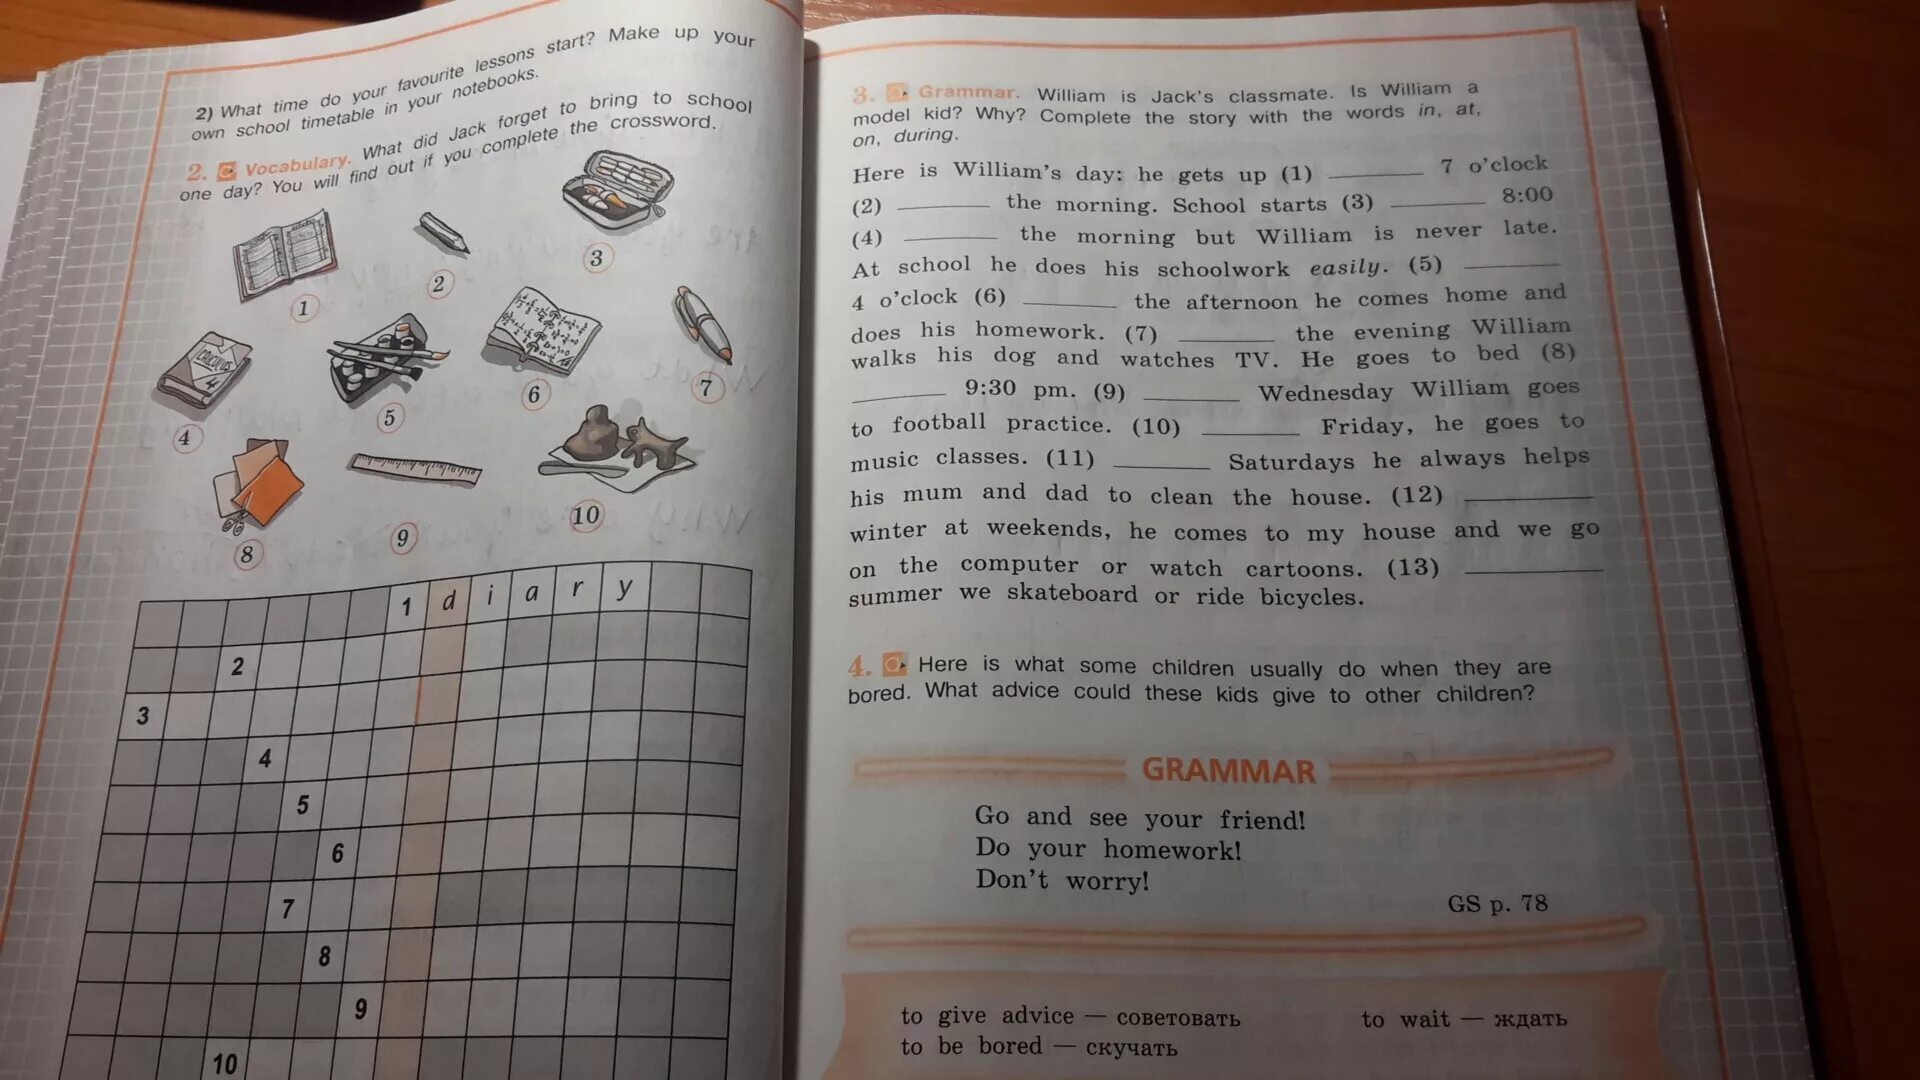 He comes home at 5. Here is what some children usually do when they are bored ответы. Английский язык 4 класс Vocabulary what did Jack forget to bring to School. Read and write in the timetable 3 класс. Complete the crossword with the Types of Houses.